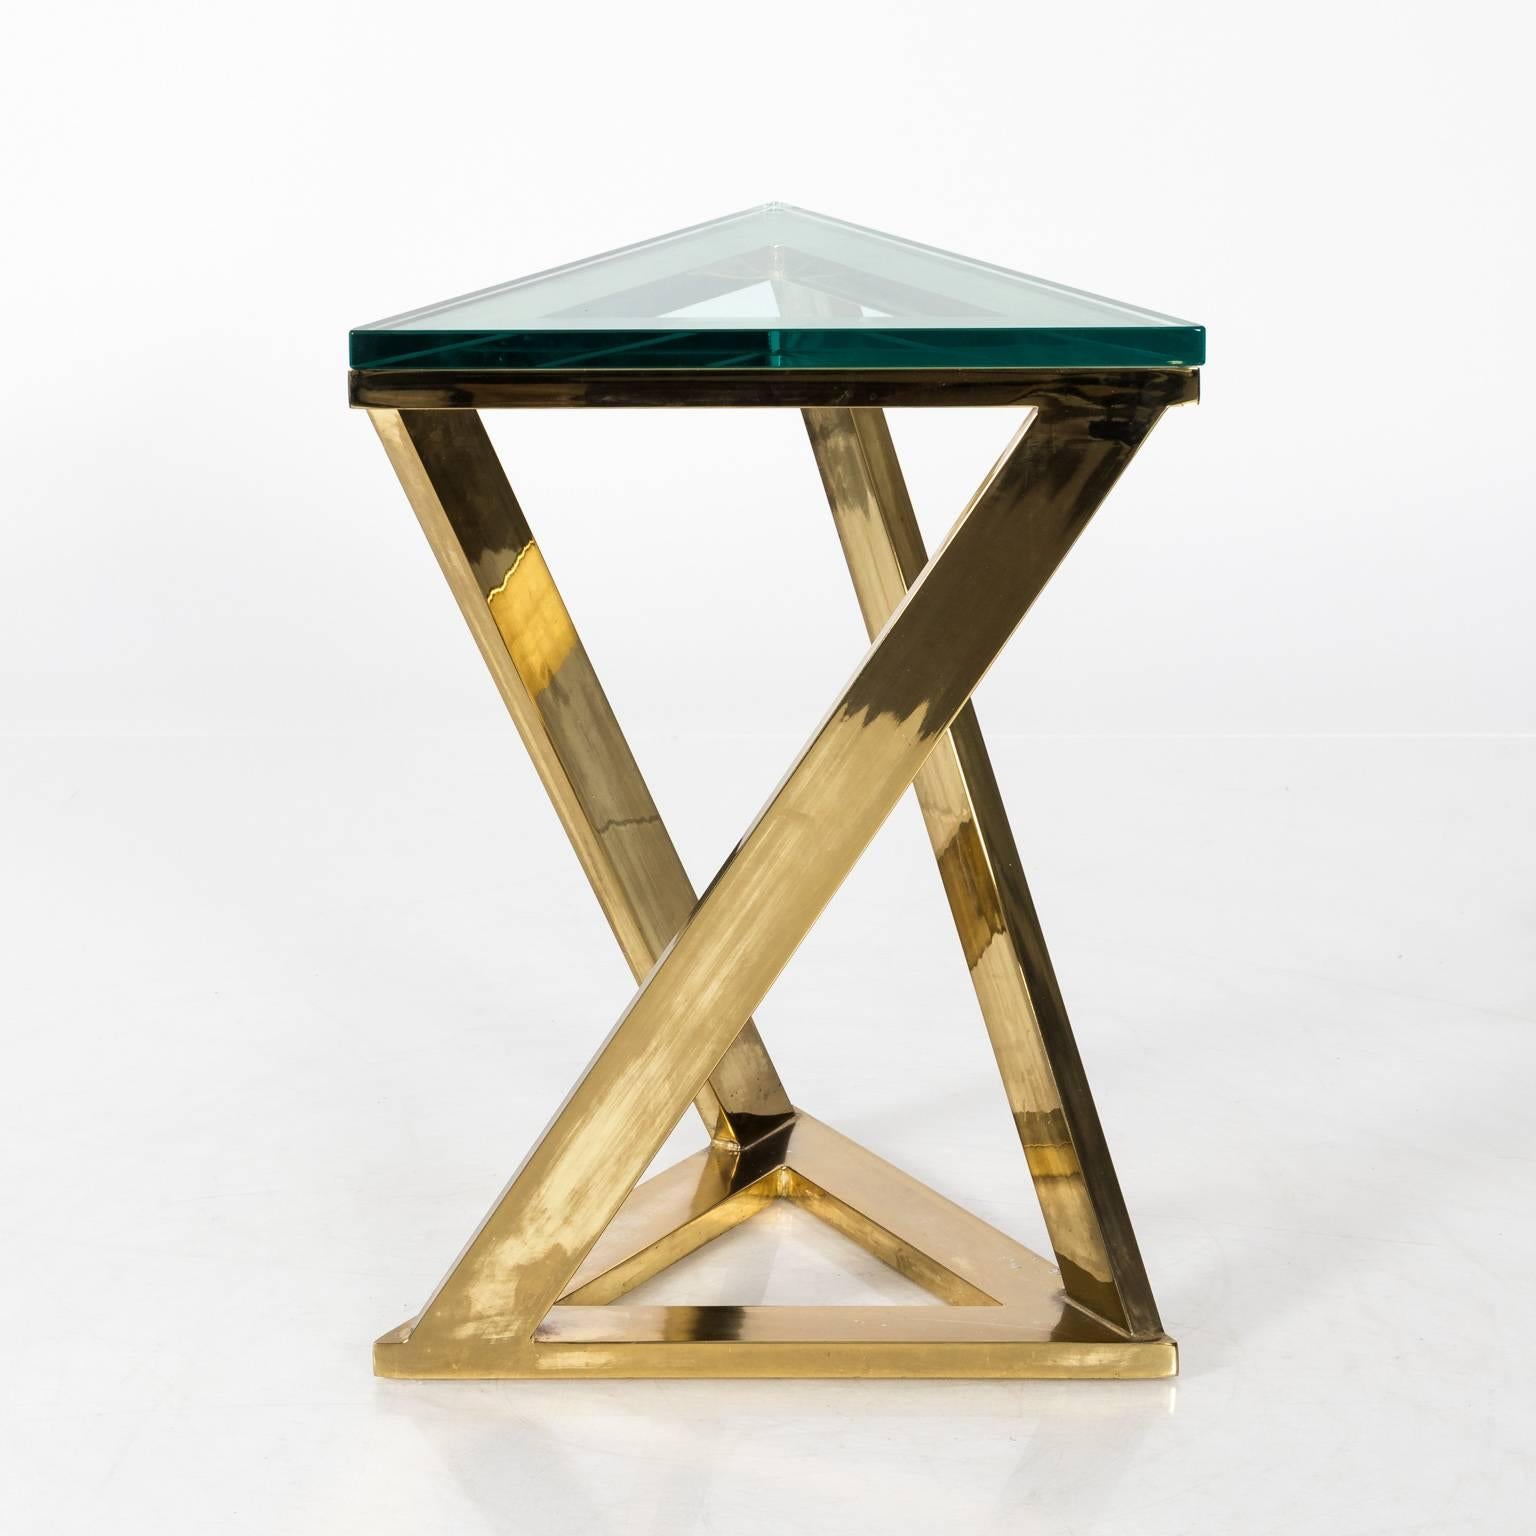 Vintage brass triangle side table, circa 1970.
 